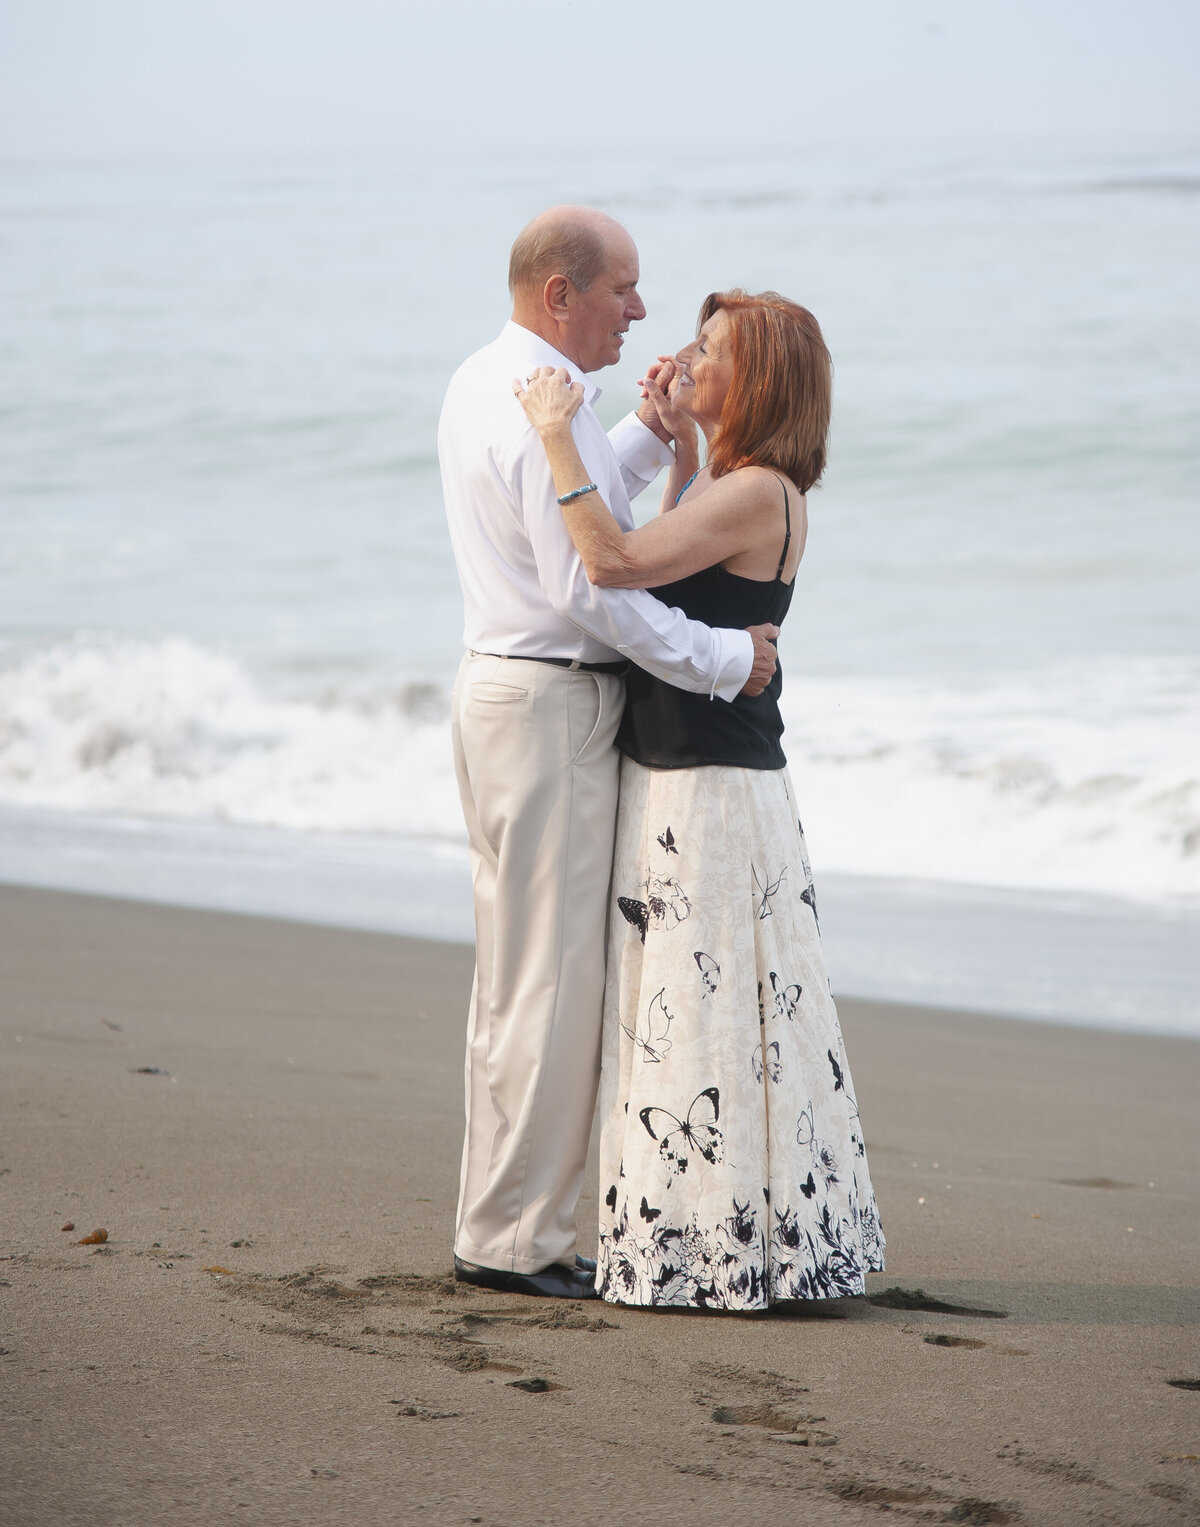 Senior couple dancing on the beach with ocean in the background